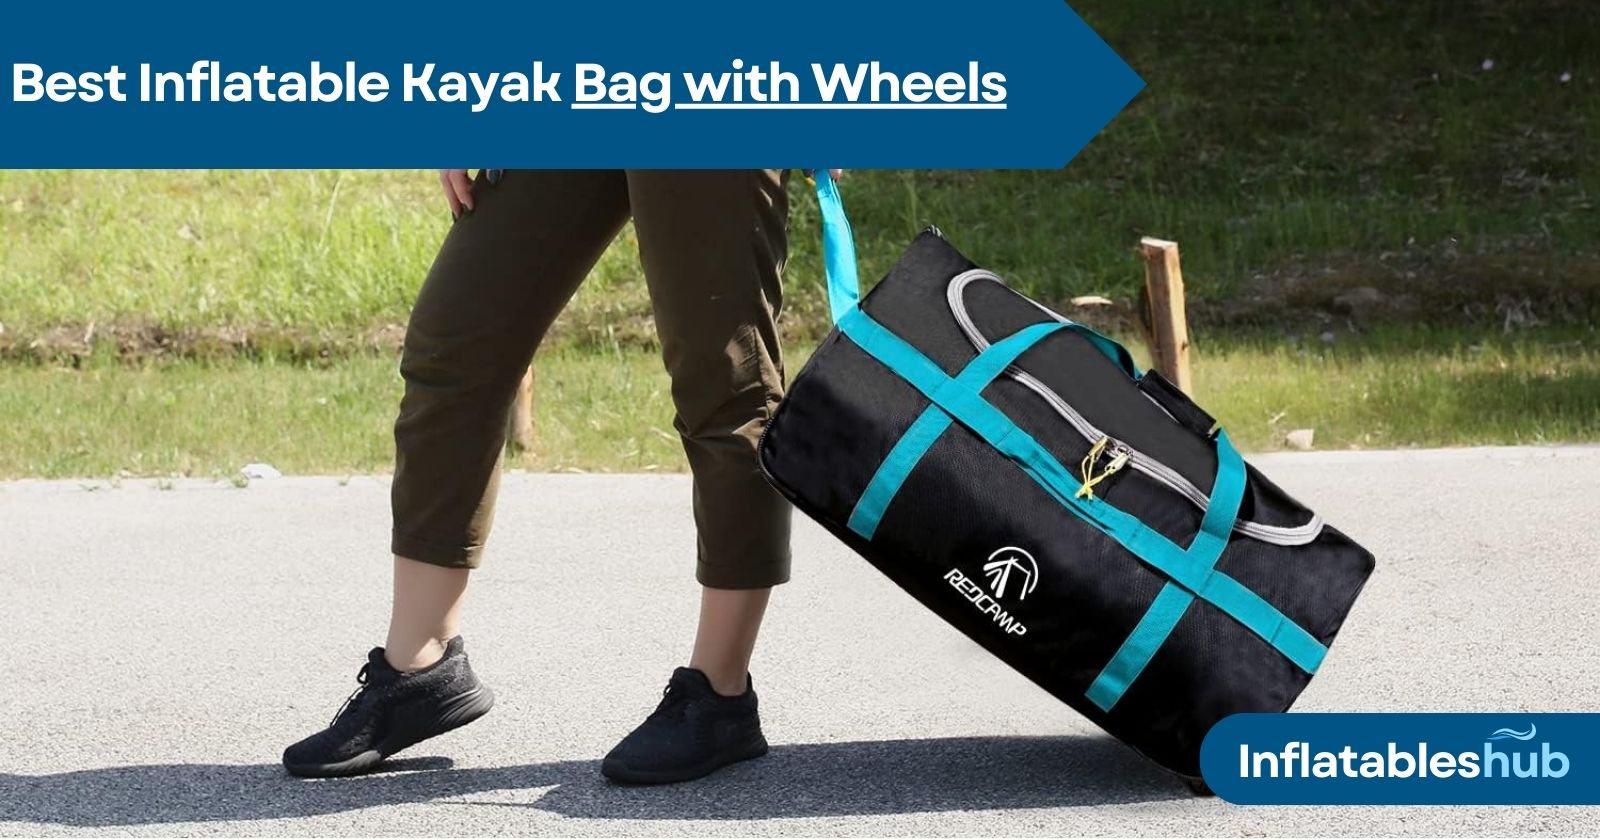 Best Inflatable Kayak Bag with Wheels